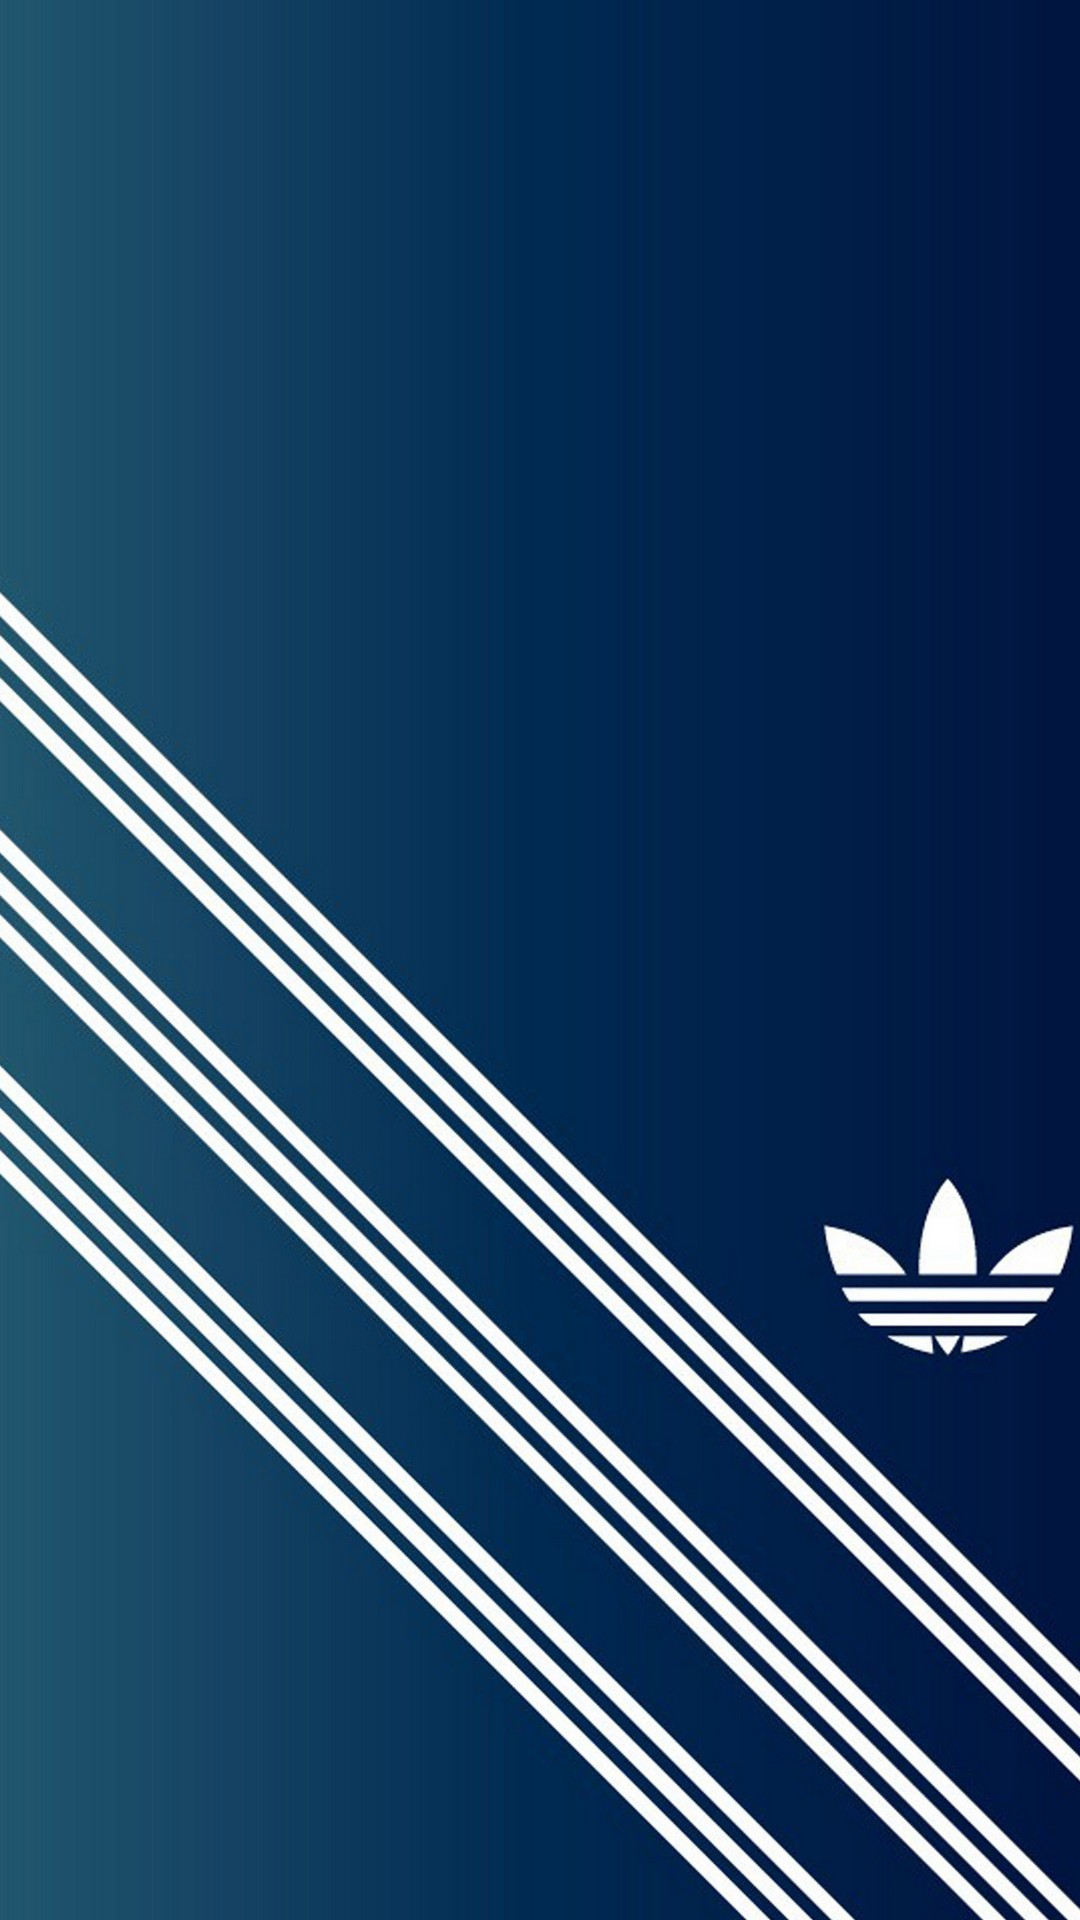 Wallpaper Logo Adidas for iPhone With high-resolution 1080X1920 pixel. You can use this wallpaper for your iPhone 5, 6, 7, 8, X, XS, XR backgrounds, Mobile Screensaver, or iPad Lock Screen